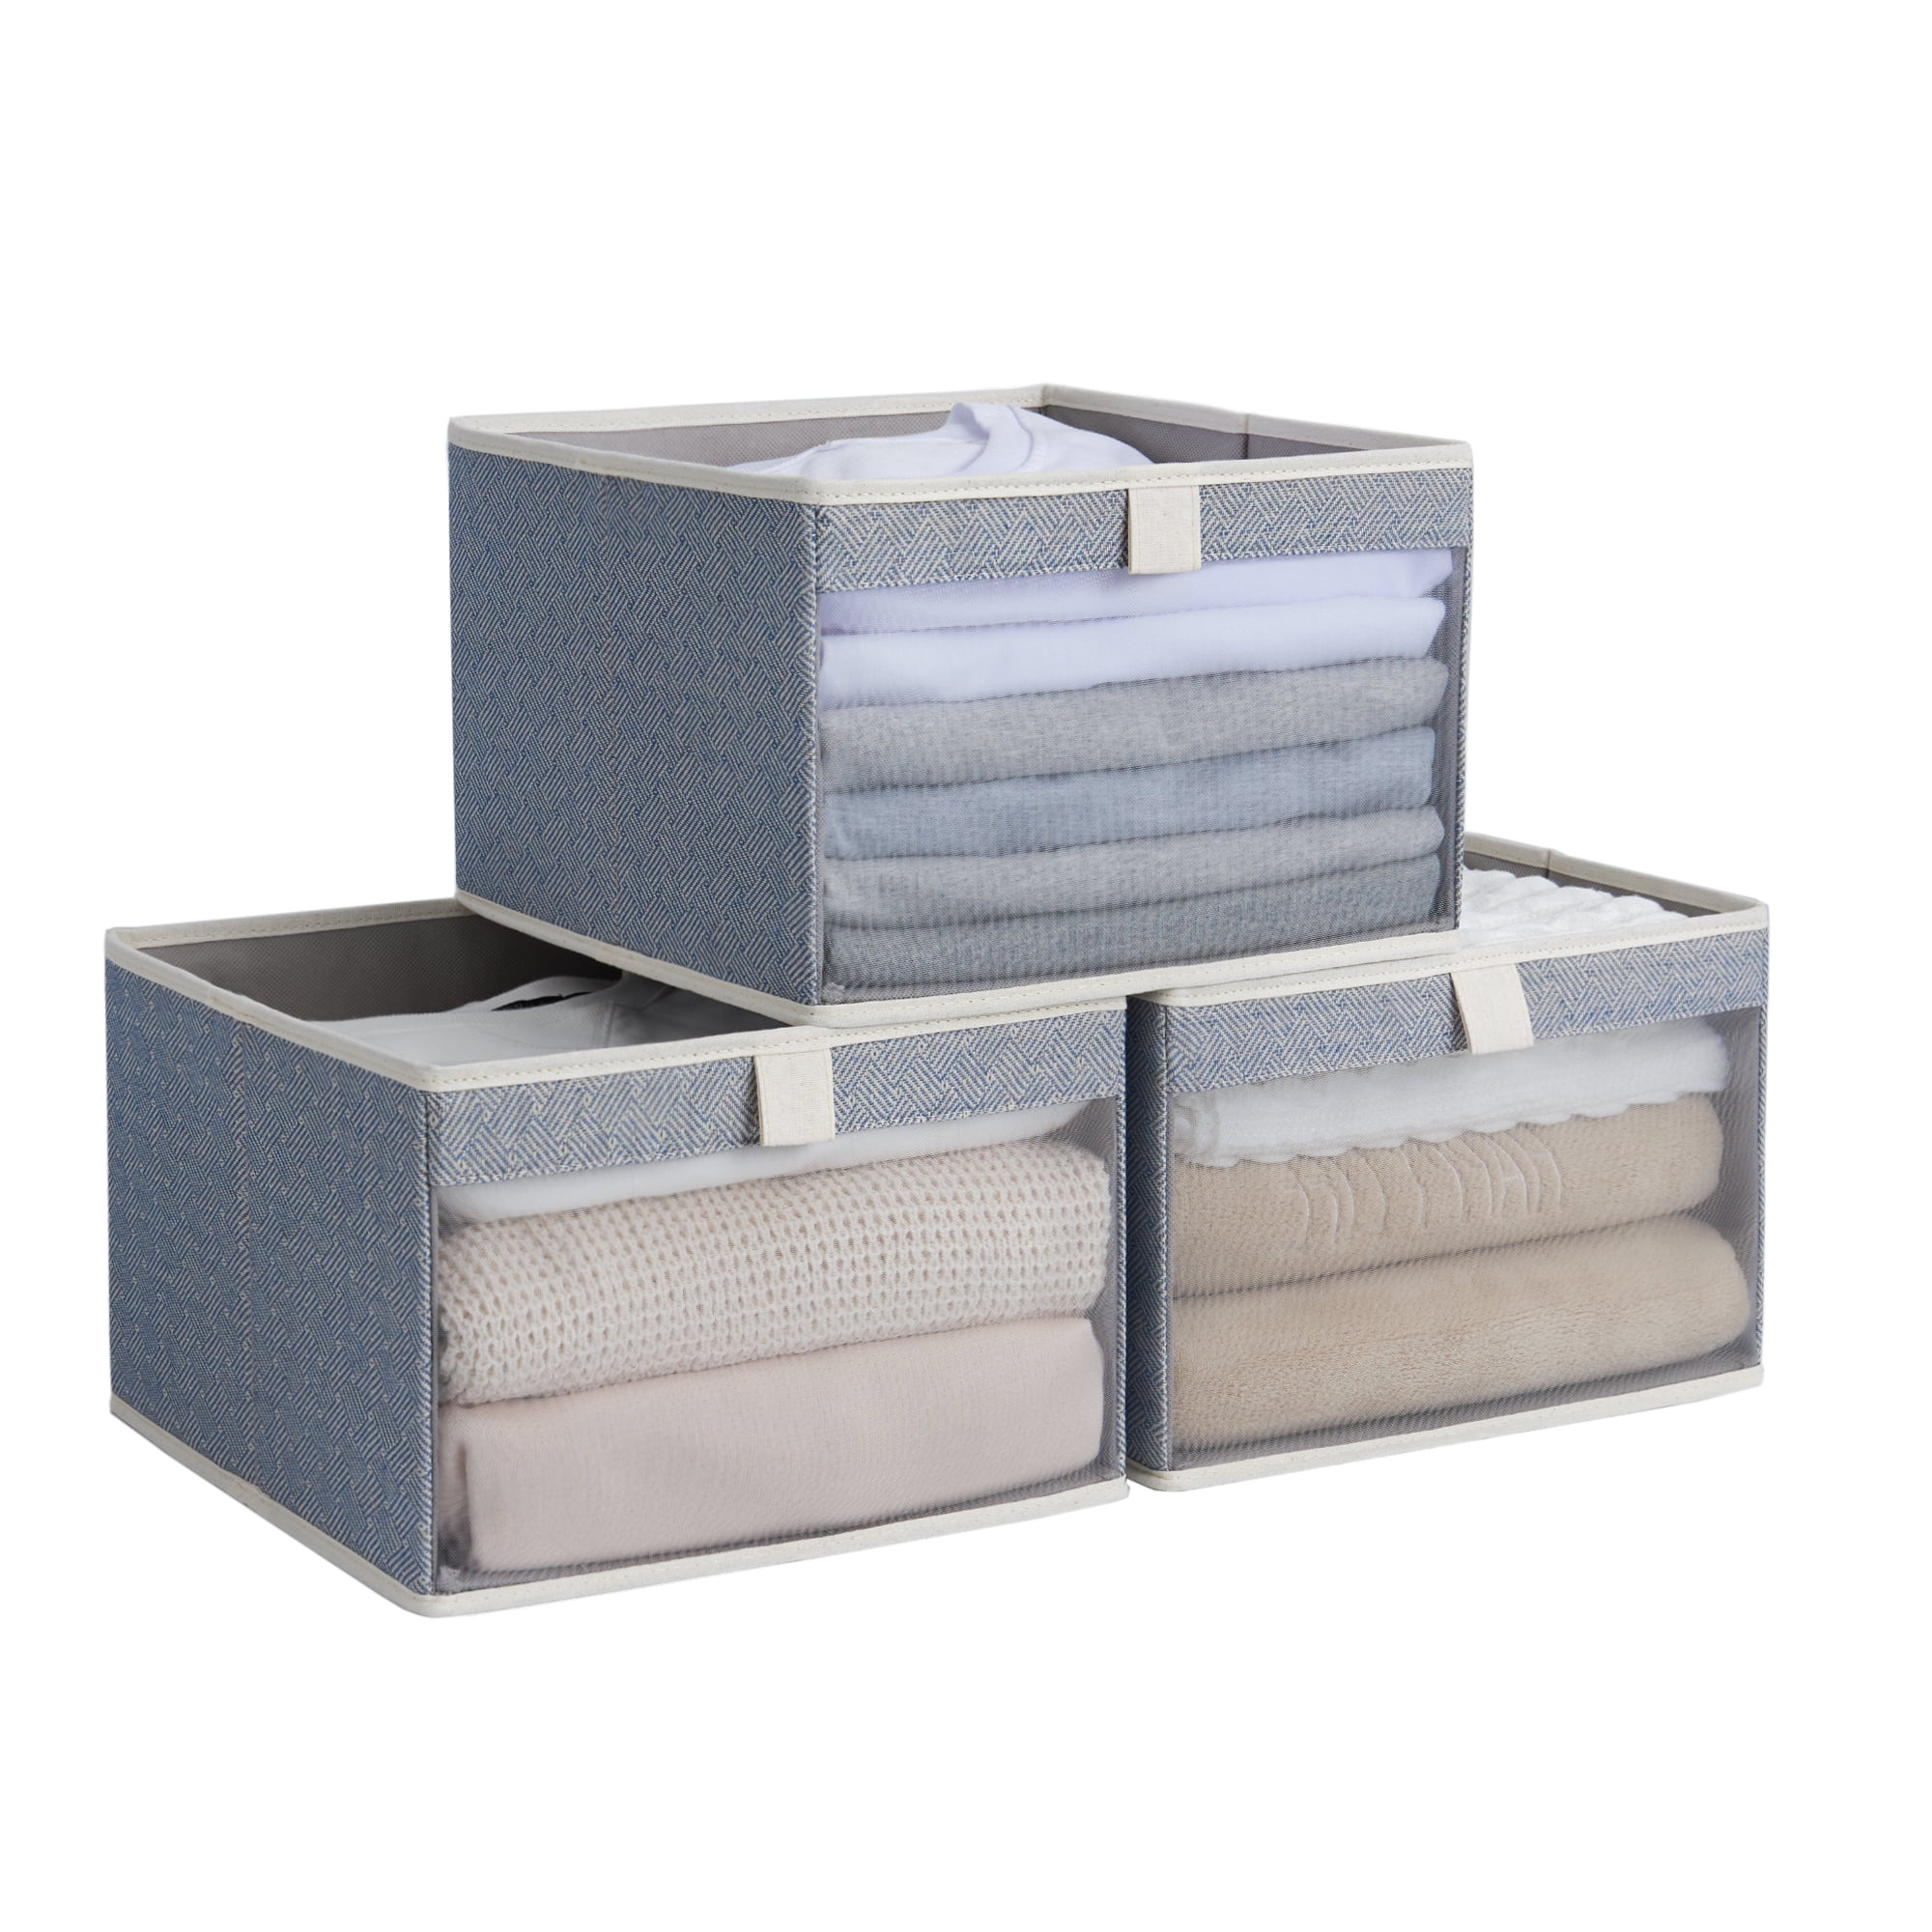 StorageWorks Foldable Storage Bins with Window, Collapsible Fabric ...